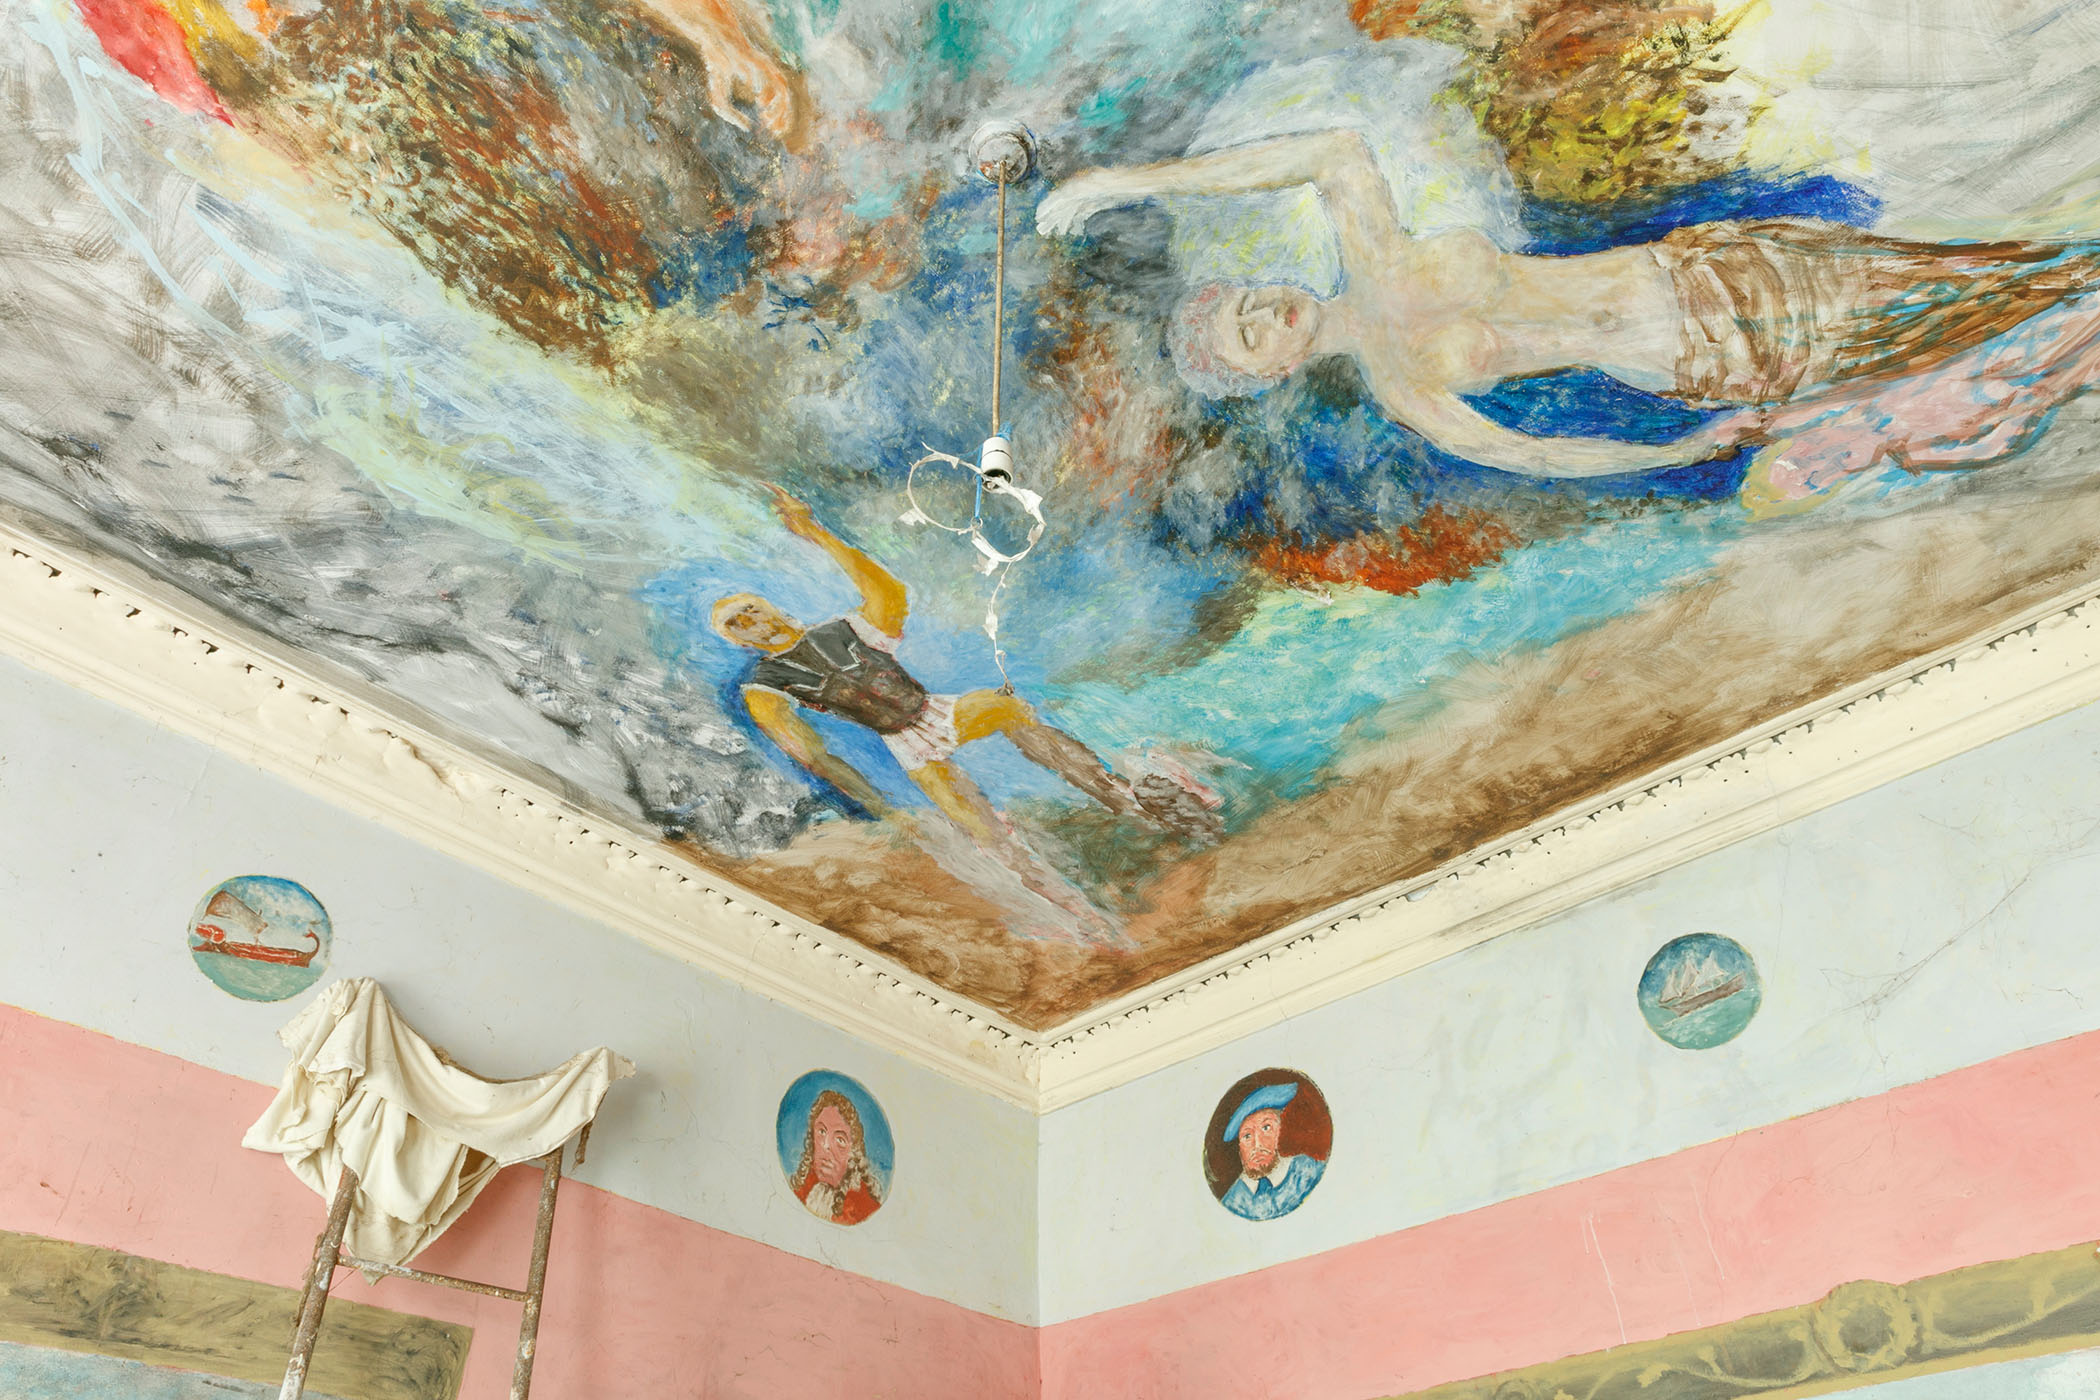 A close-up photograph of a ceiling with a painted mural.